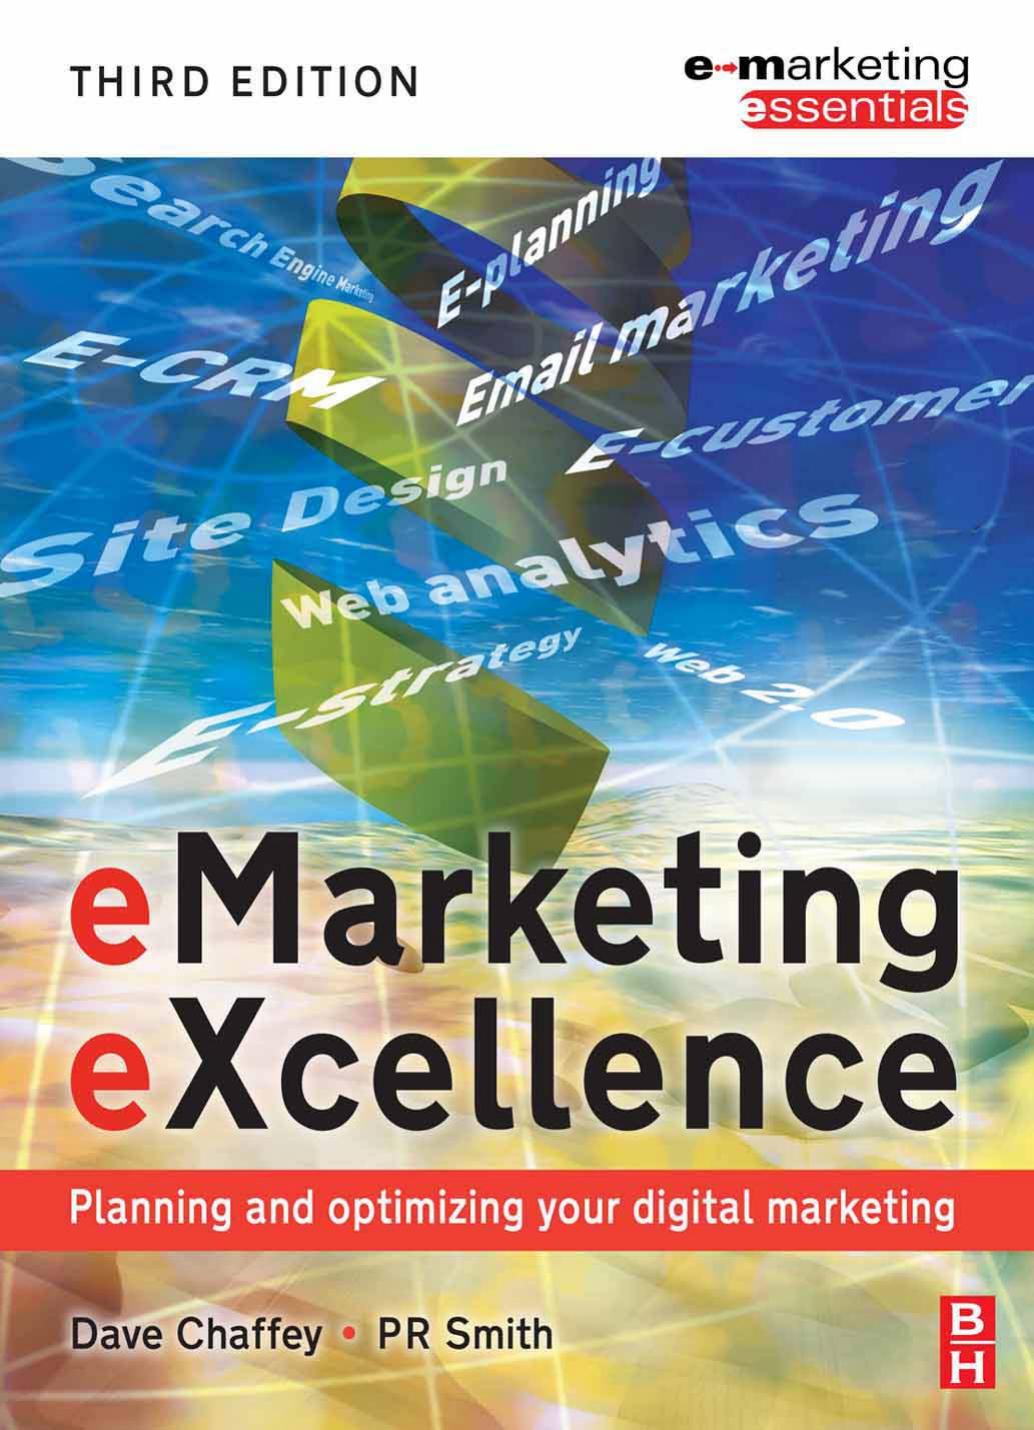 Dave Chaffey, Paul Smith eMarketing eXcellence, Third Edition Planning and optimising your digital marketing Emarketing Essentials 2008